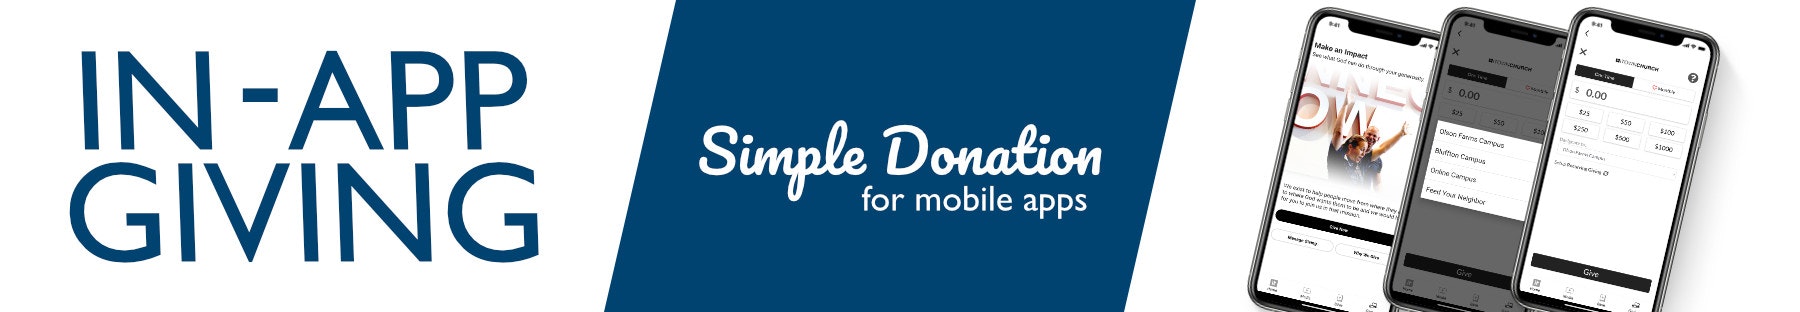 How to Have a Magical In-App Giving Experience - By Simple Donation